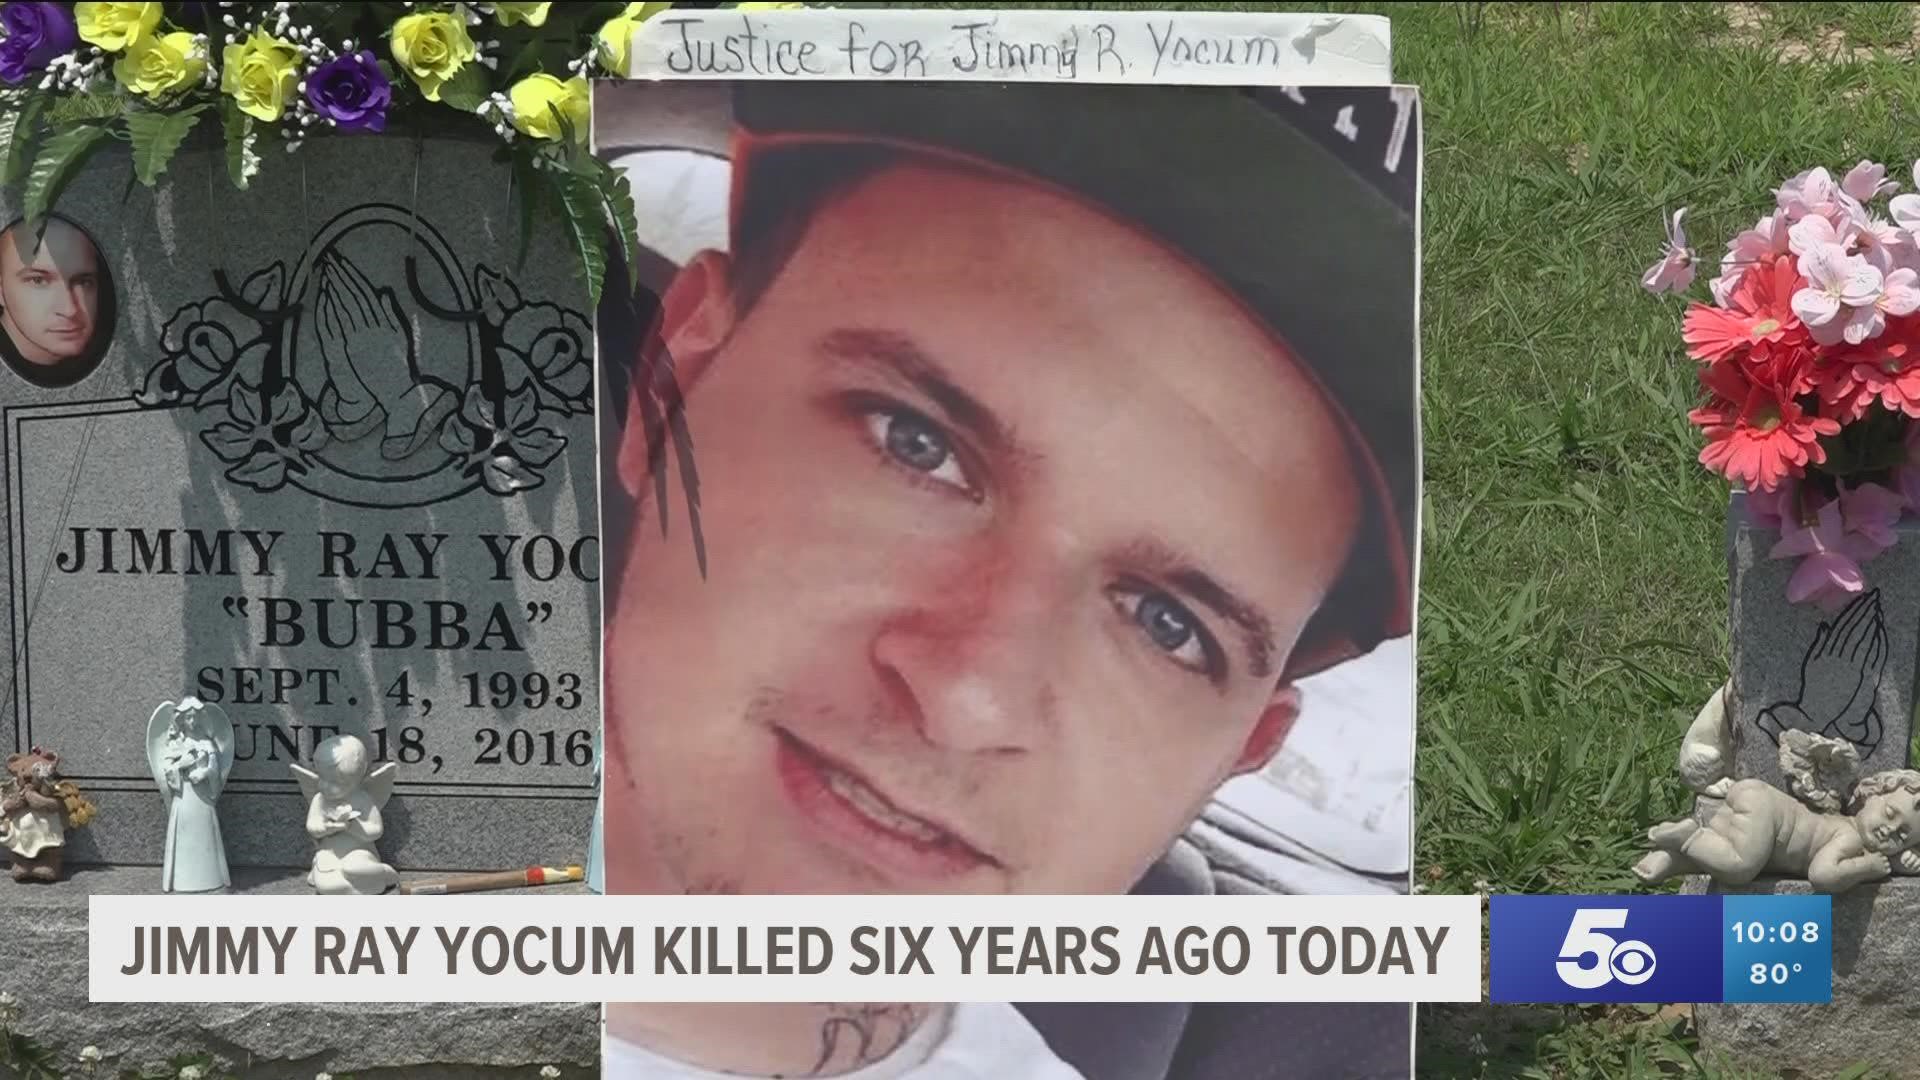 Jimmy Ray Yocum was killed 6 years ago in Fort Smith.